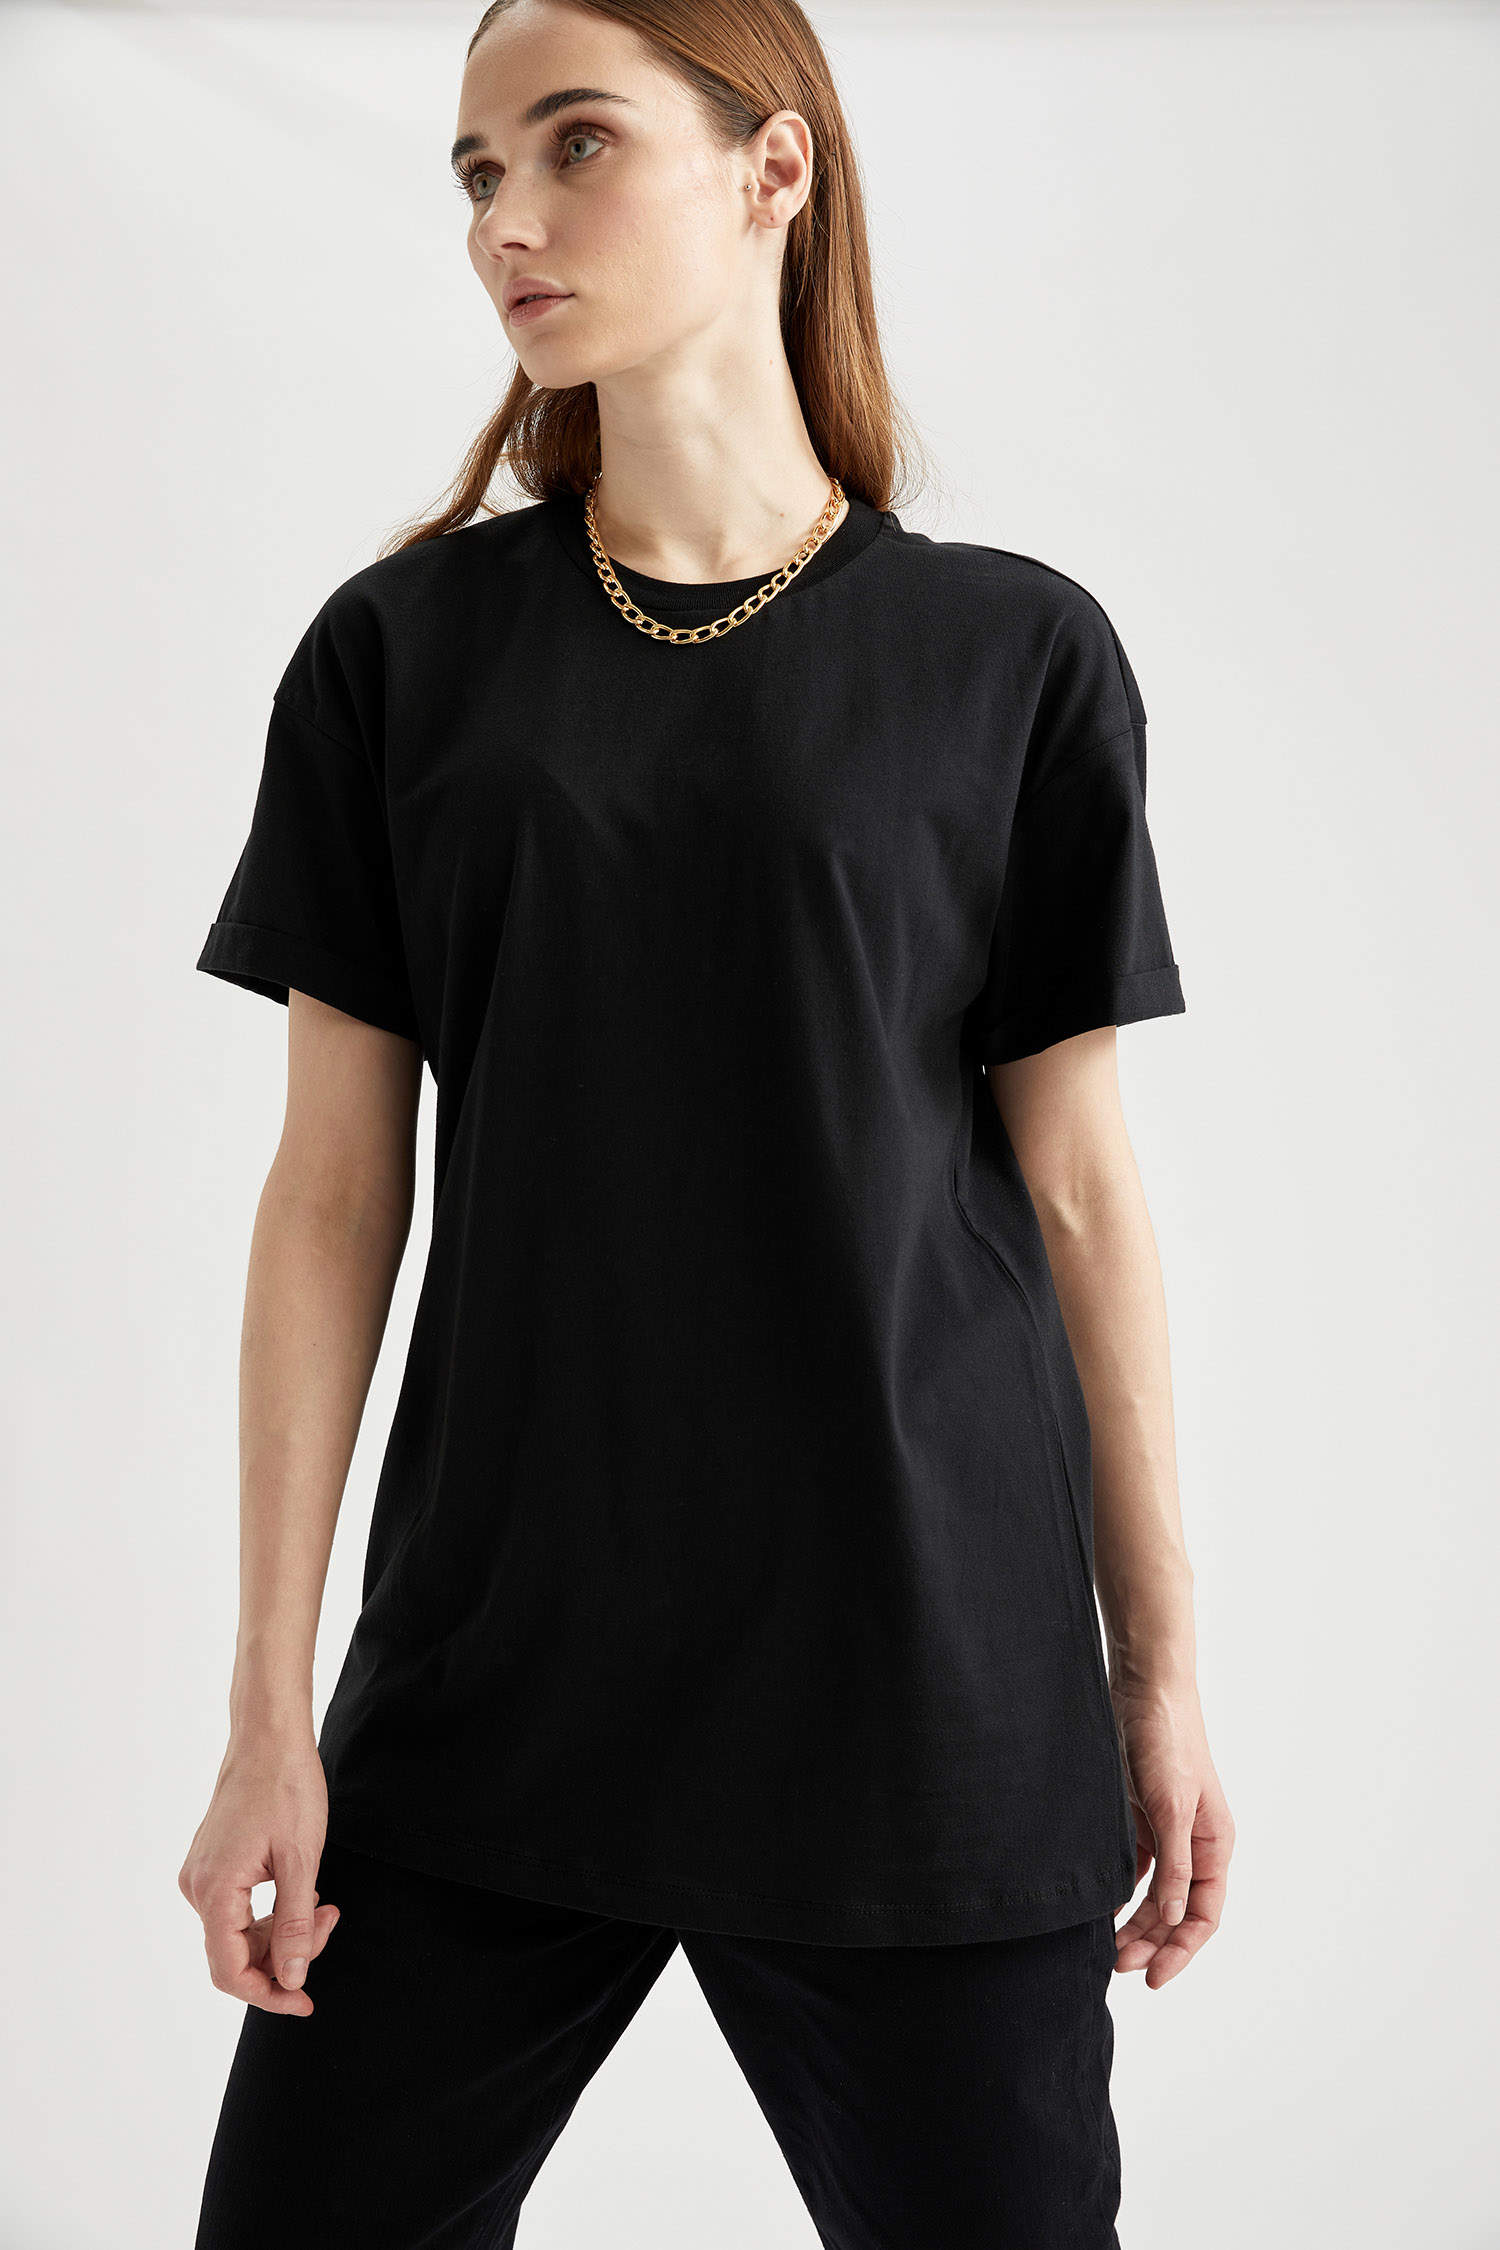 Black WOMAN Relax Fit Crew Neck Short Sleeve Tunic 1203802 | DeFacto